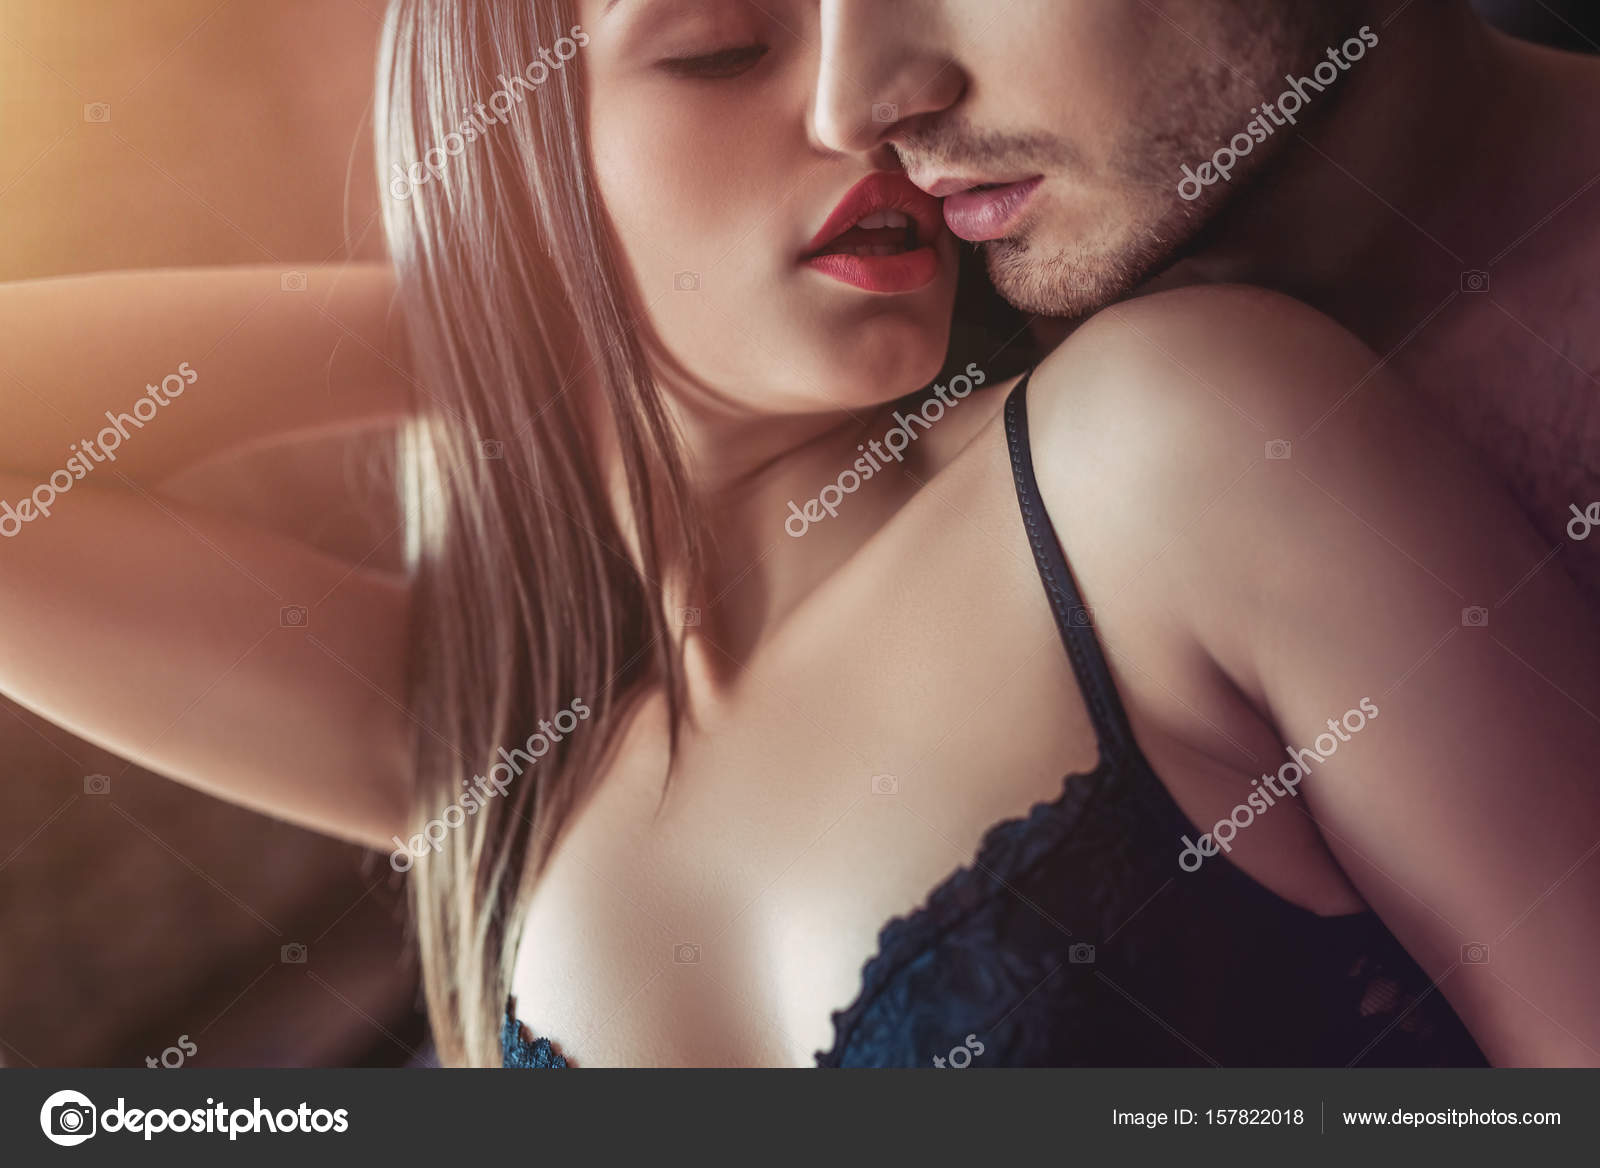 Pictures Of Couples Having Sex